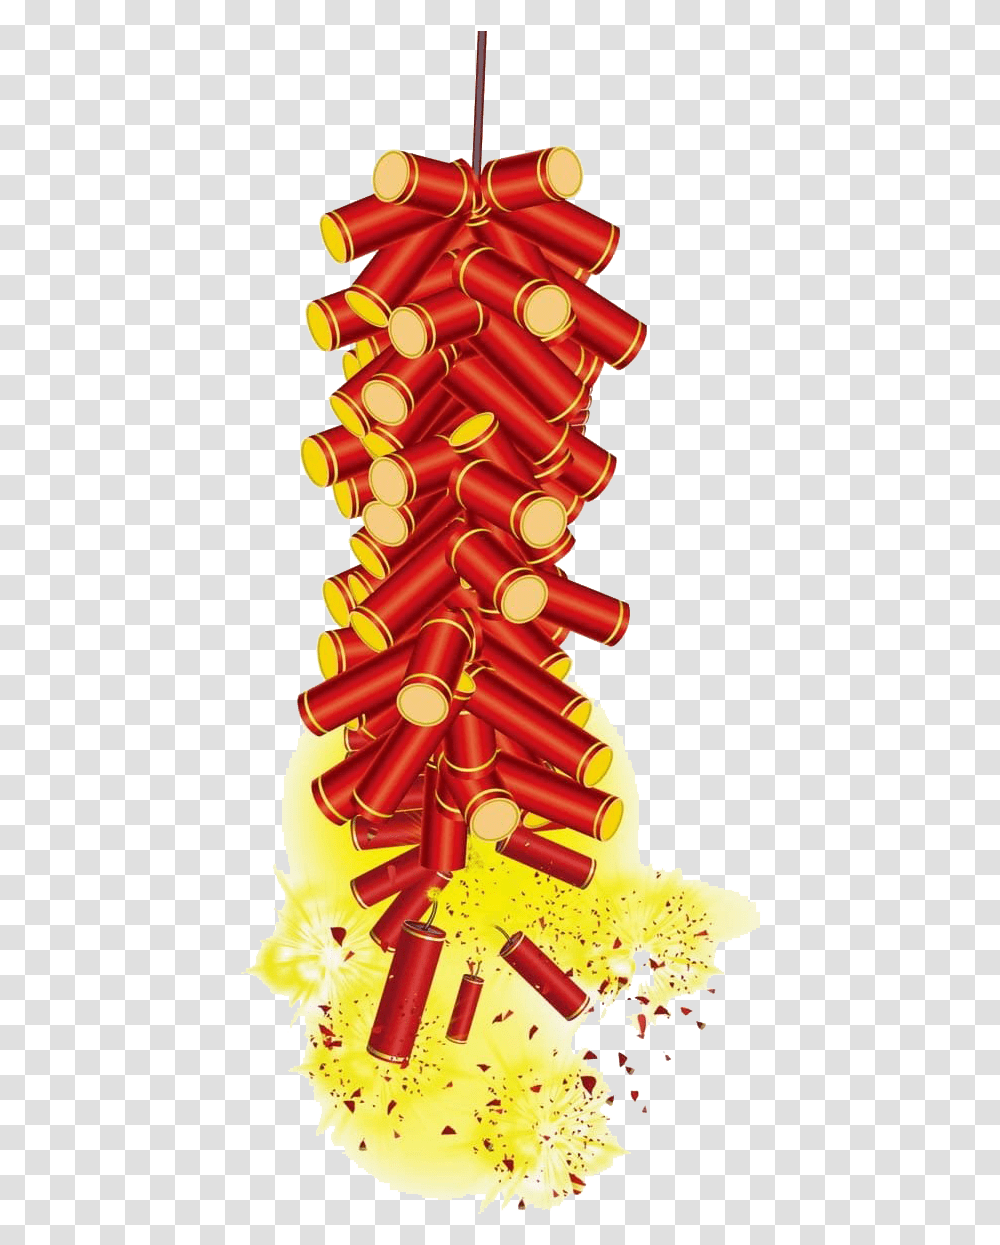 Firecrackers Image File Chinese New Year, Weapon, Weaponry, Bomb, Dynamite Transparent Png